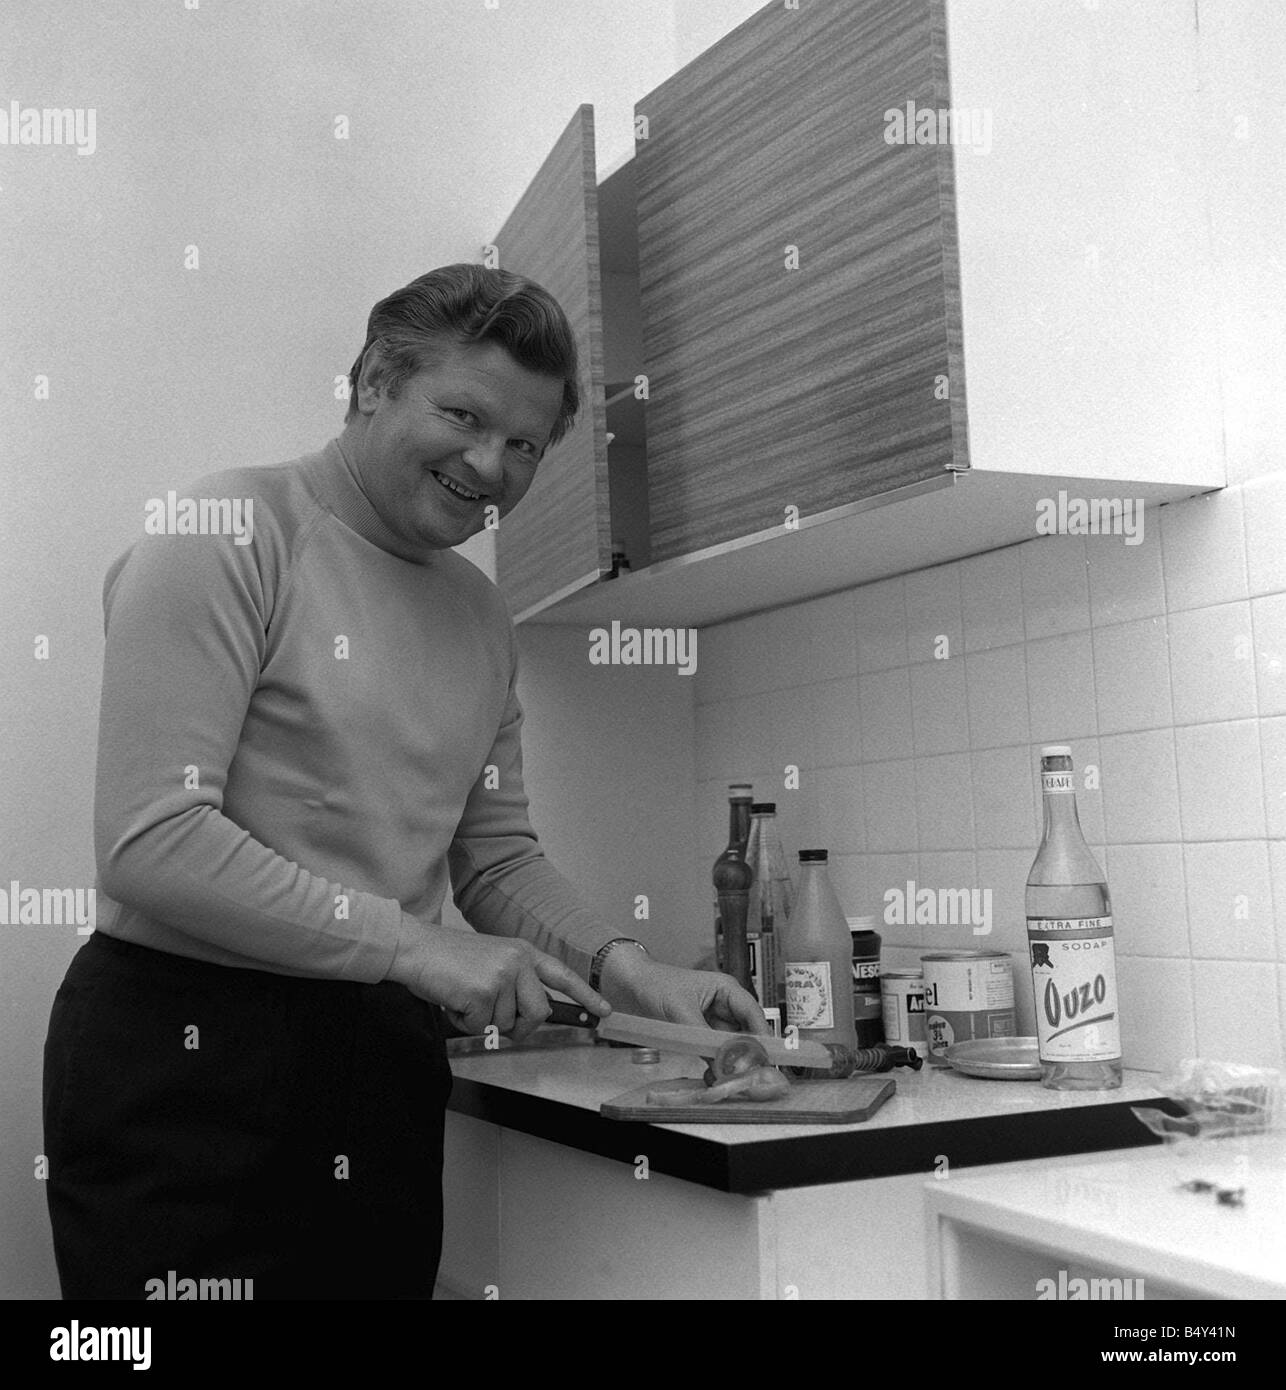 Comedian Benny Hill in his flat in the kitchen 1969 January 21st Marks the anniversary of the birth of British comedian Alfred Hill Better known as Benny Hill he appeared in comedy revues on stage on the radio and in 1949 on the television show Hi There In 1955 he started The Benny Hill Show featuring skits and songs from the bottoms and bosoms school of British humor Hill also appeared occasionally in films including Chitty Chitty Bang Bang In the 1970s The Benny Hill Show made it to the U S and Hill became an international star of TV comedy until his show was cancelled in 1989 Benny Hill Stock Photo